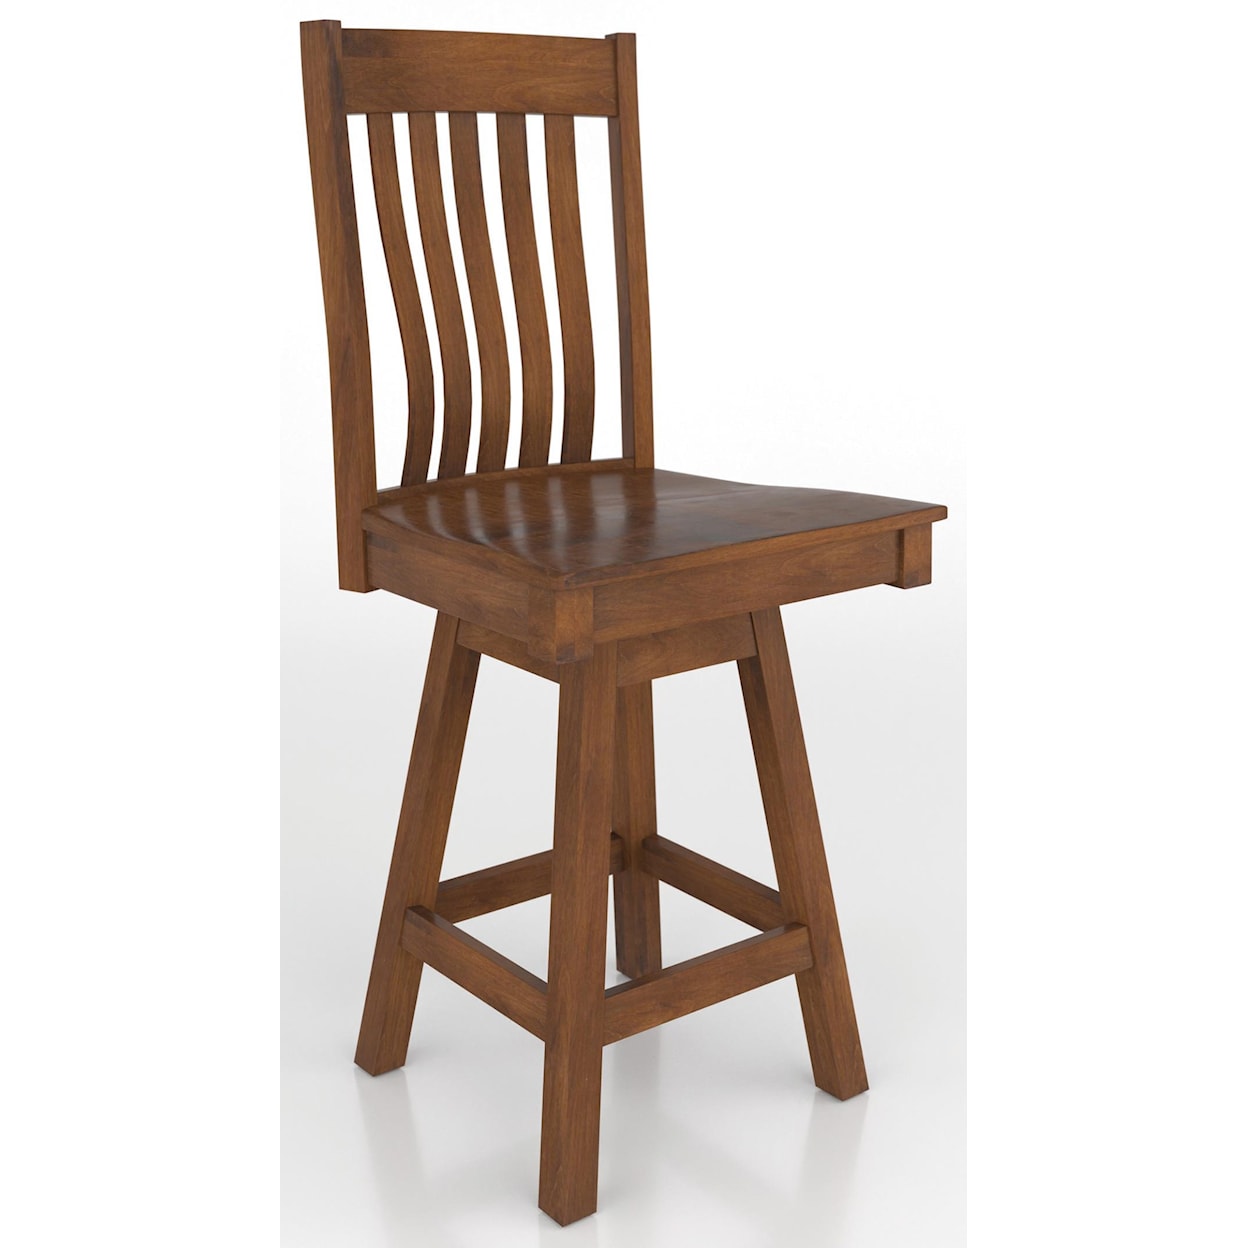 Wengerd Wood Products Rockpoint 24" Swivel Stool